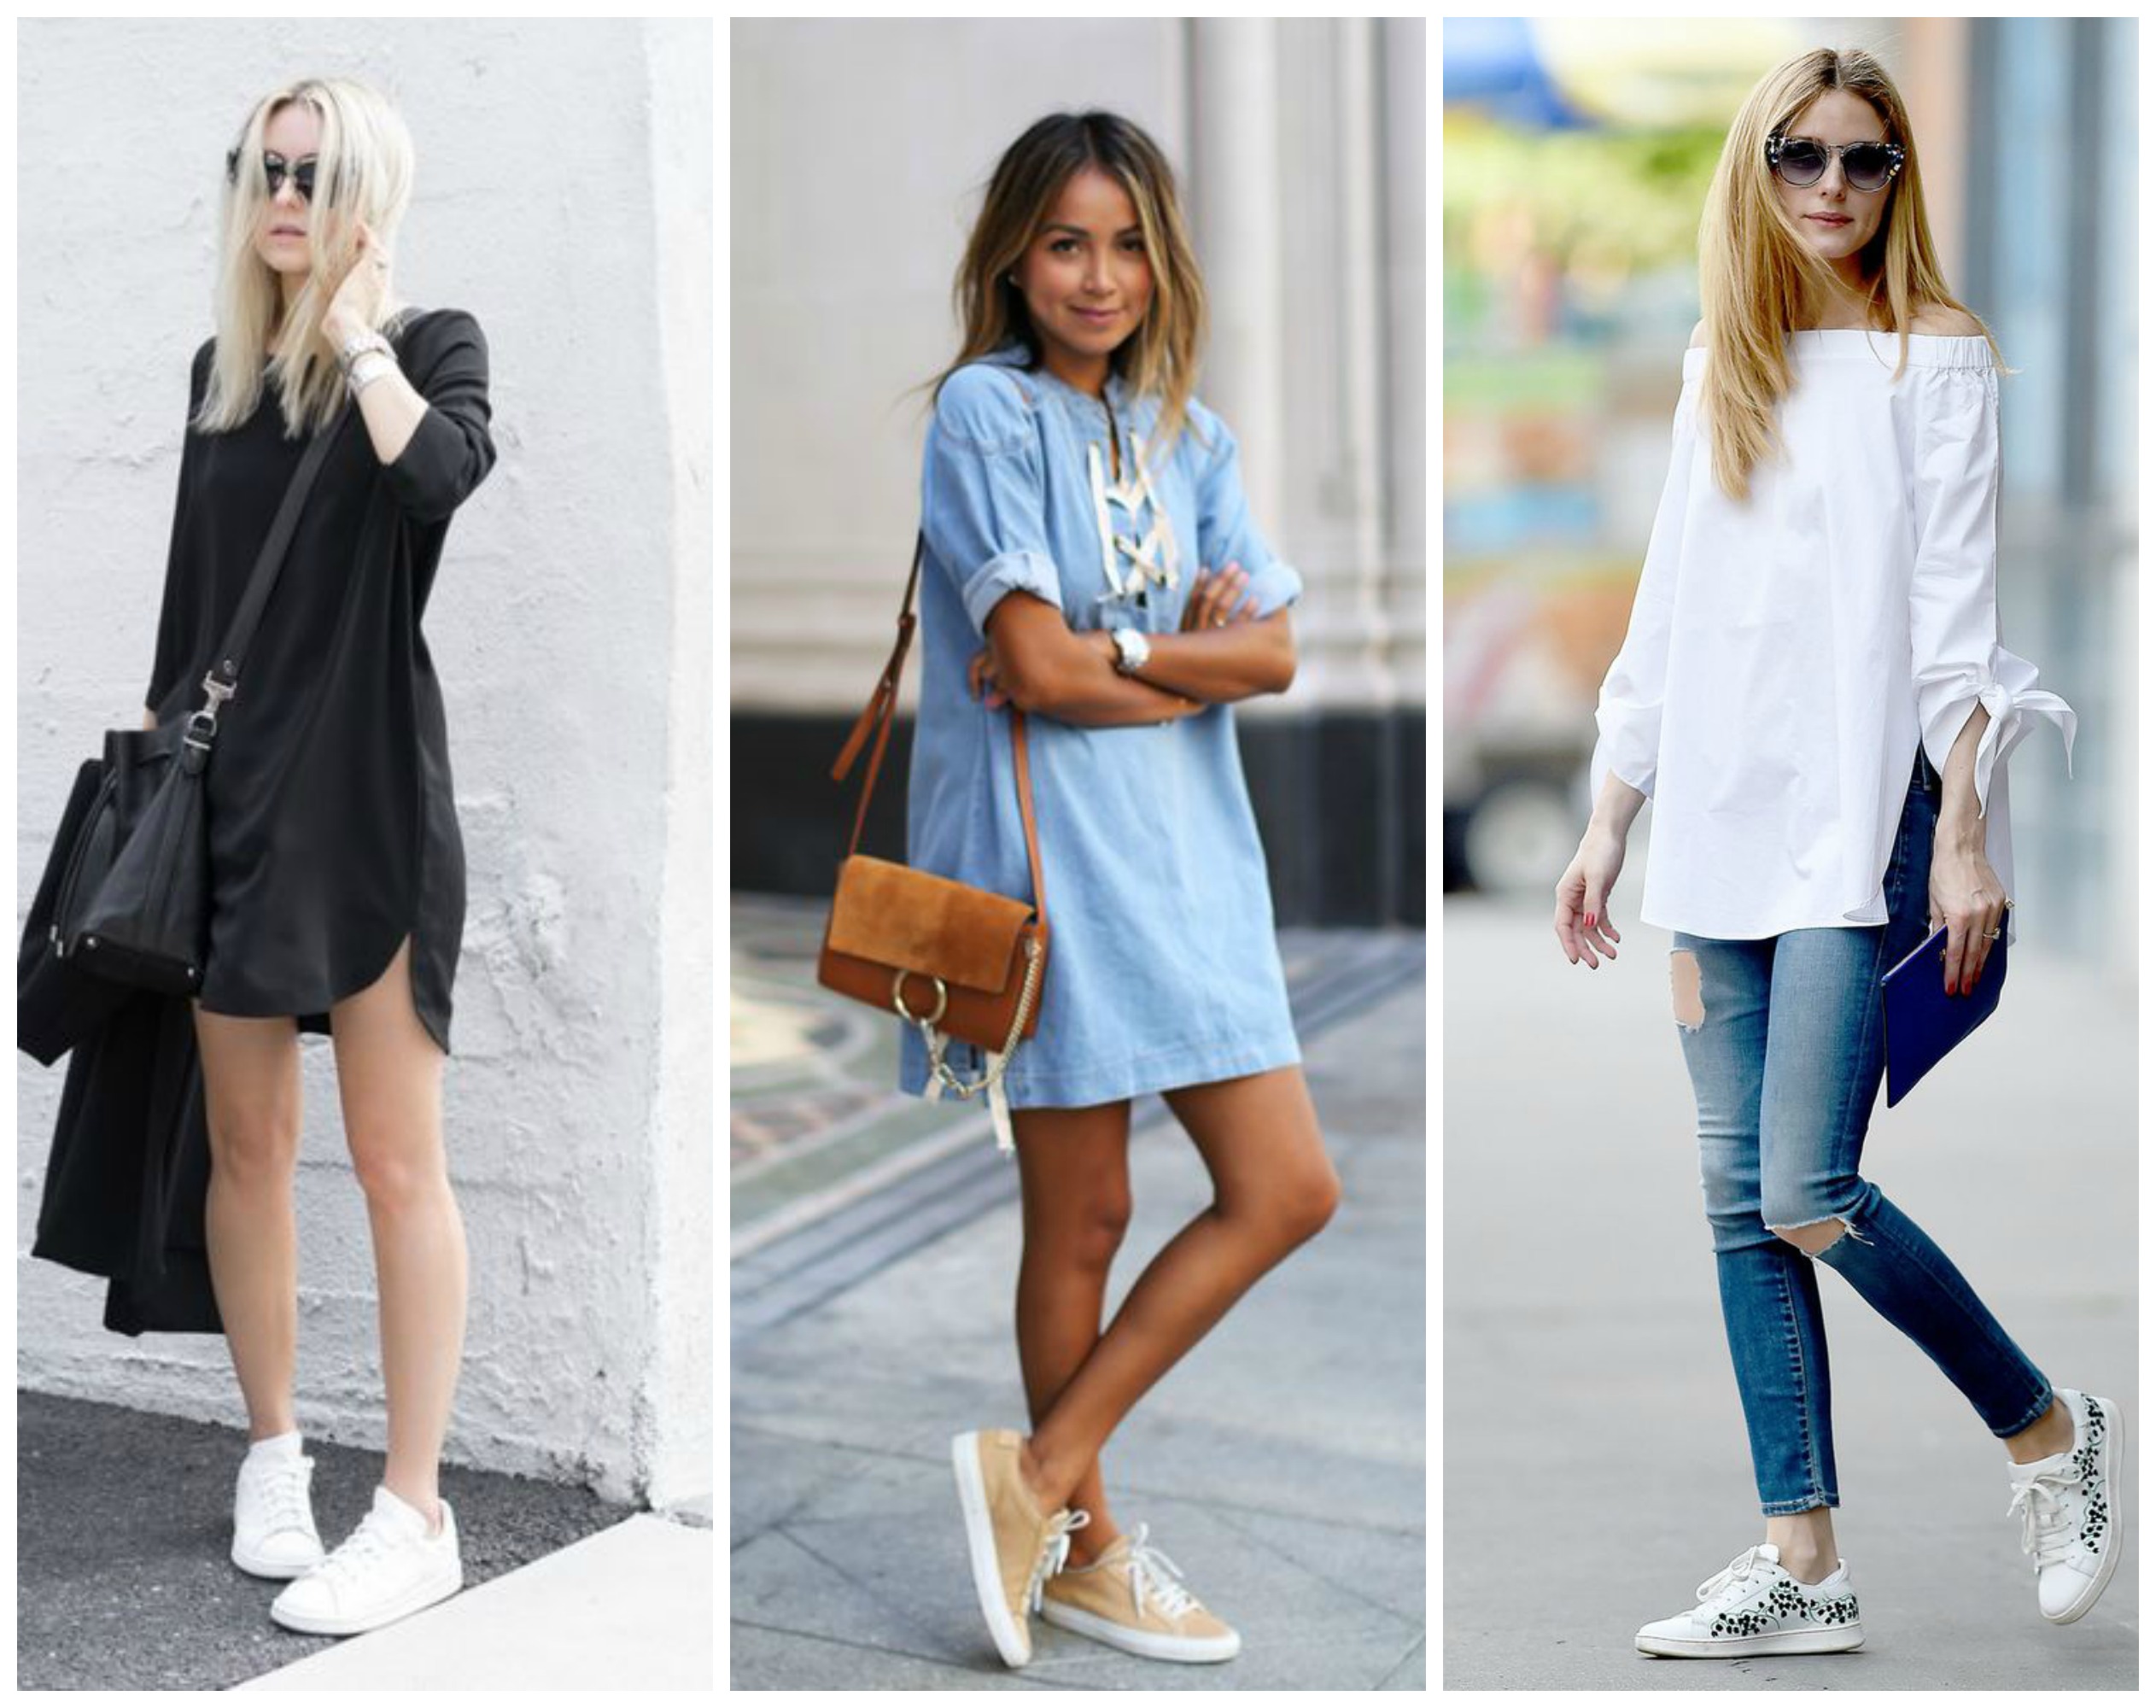 What Shoes to Wear With Tunics-22 Best Shoe Ideas for Tunics